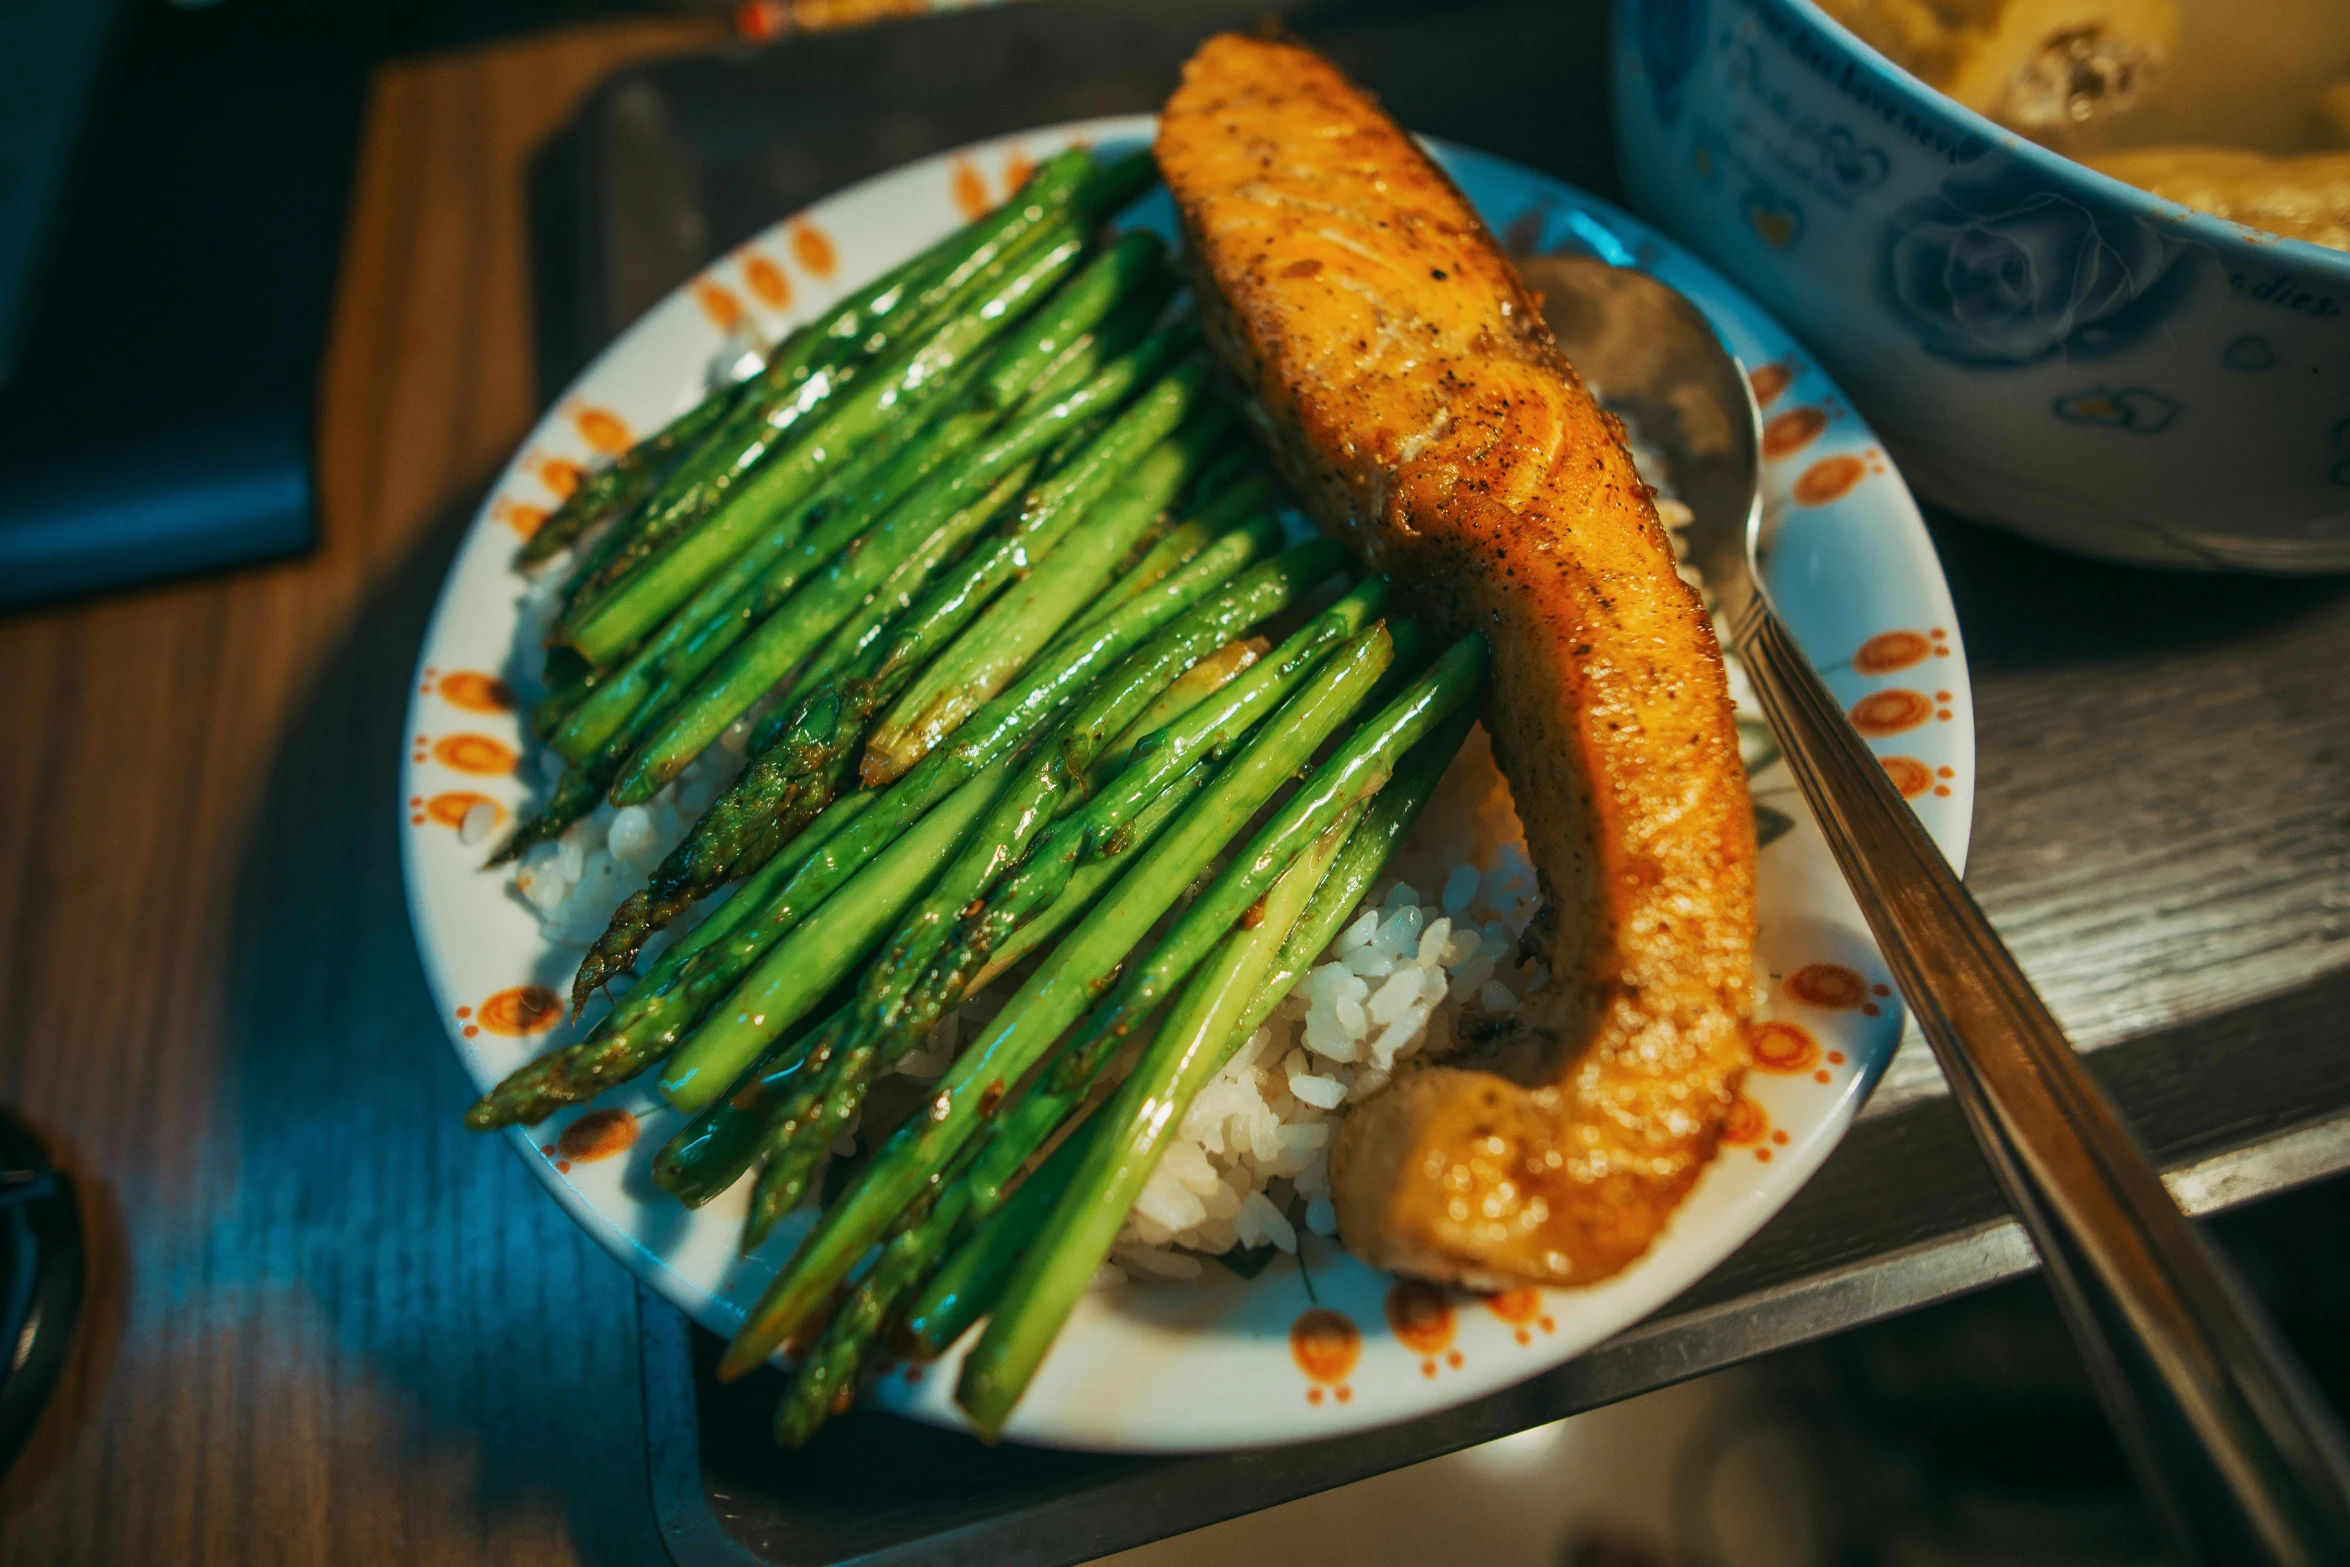 a close up of a plate of food with asparagus, unsplash, salmon khoshroo, 🚿🗝📝, 90s photo, background image